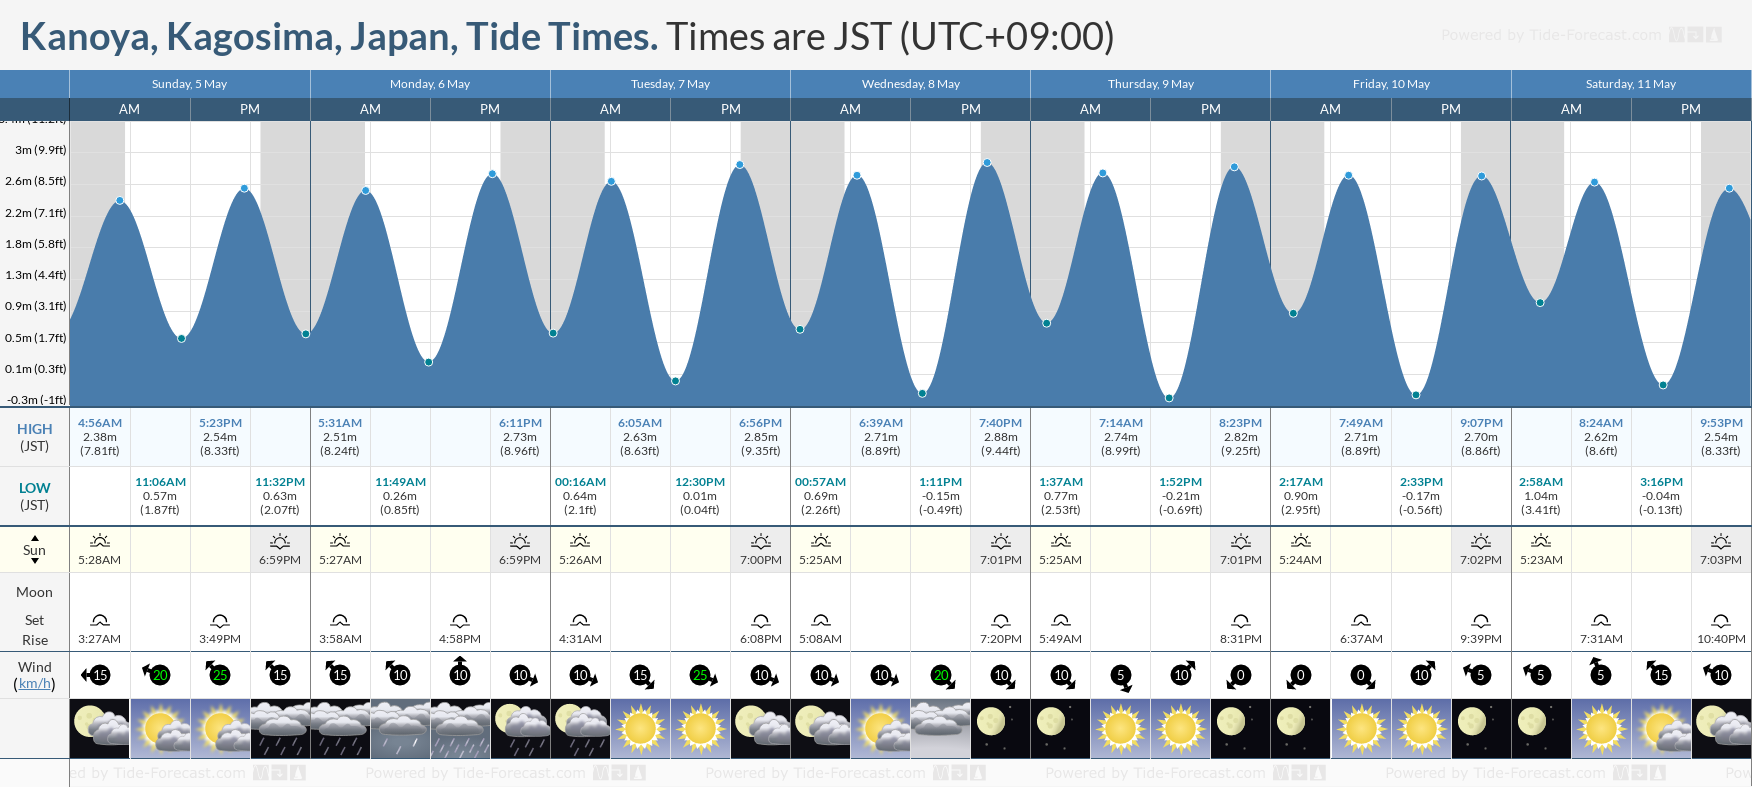 Kanoya, Kagosima, Japan Tide Chart including high and low tide tide times for the next 7 days